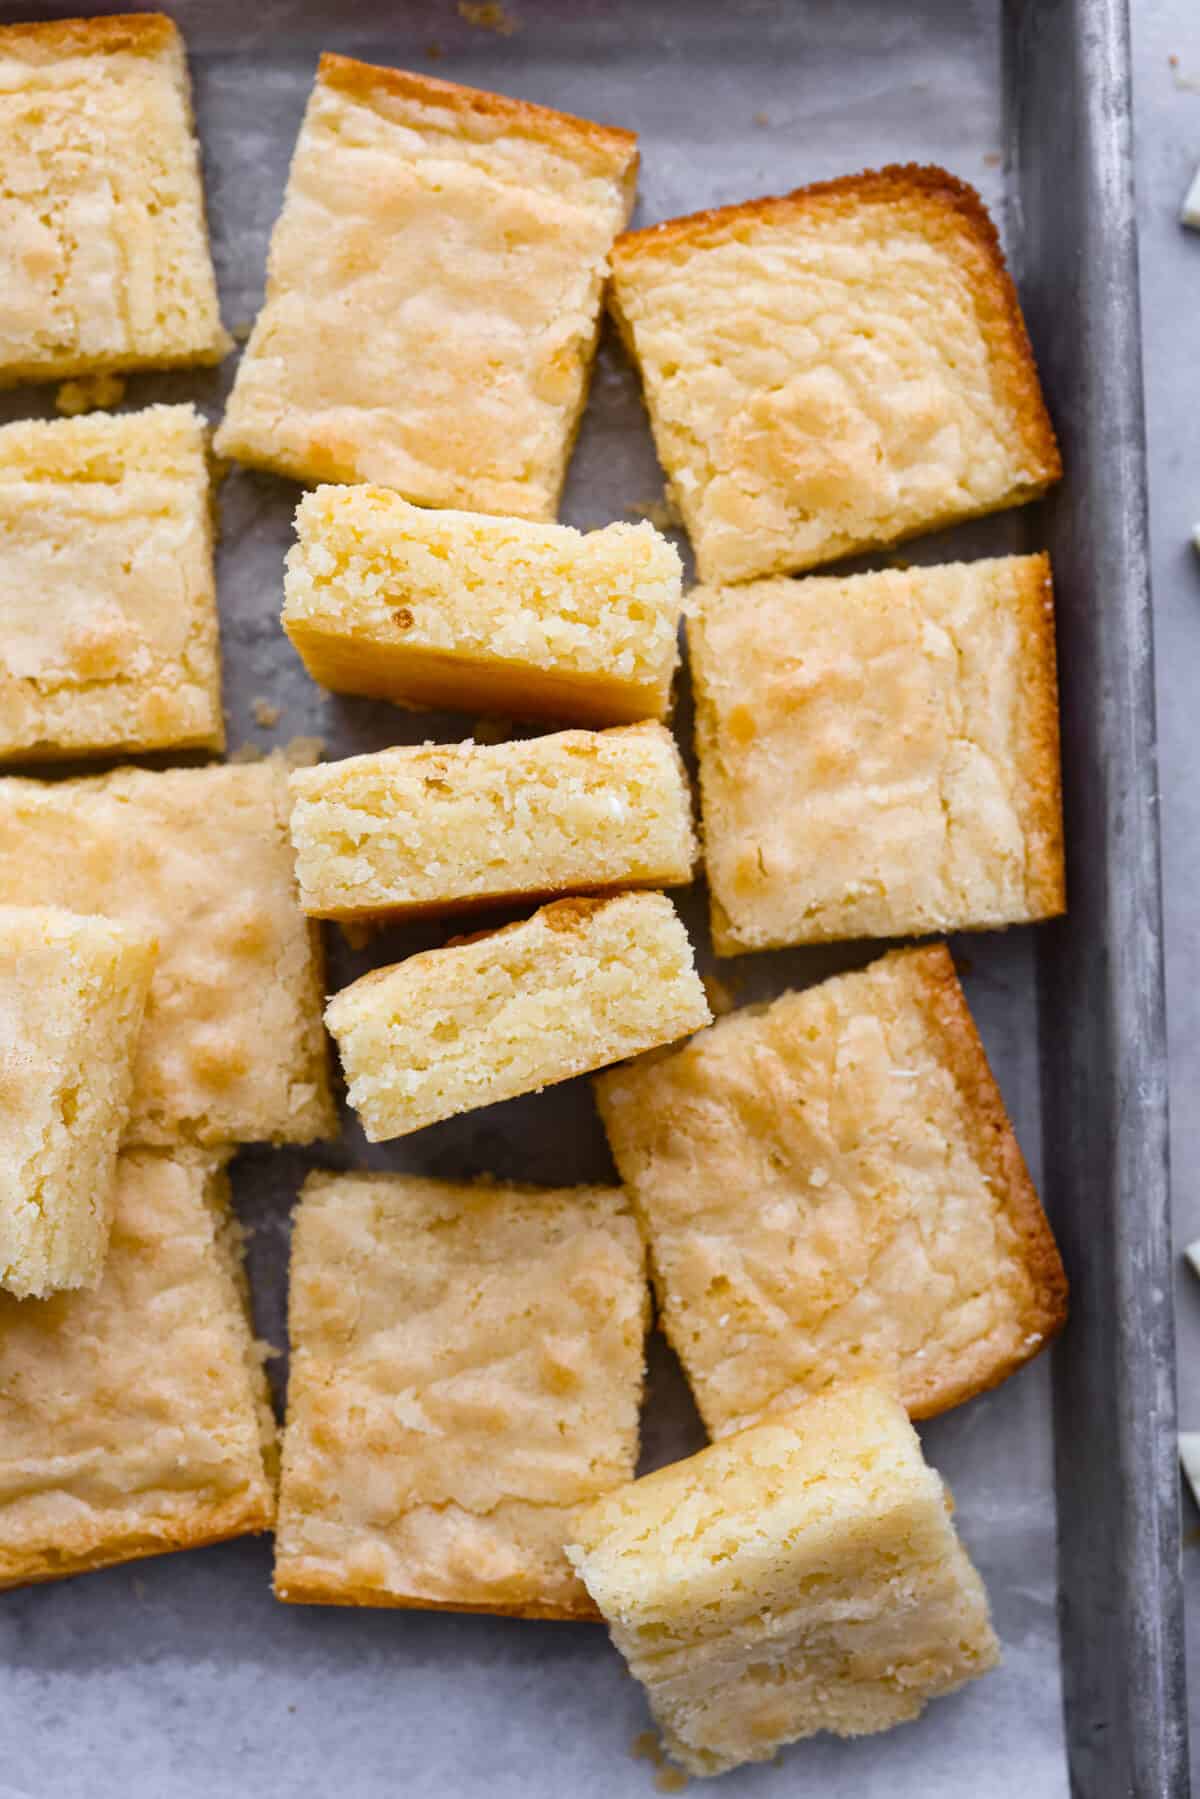 Top-down view of white chocolate brownies in a metal pan, cut into squares.